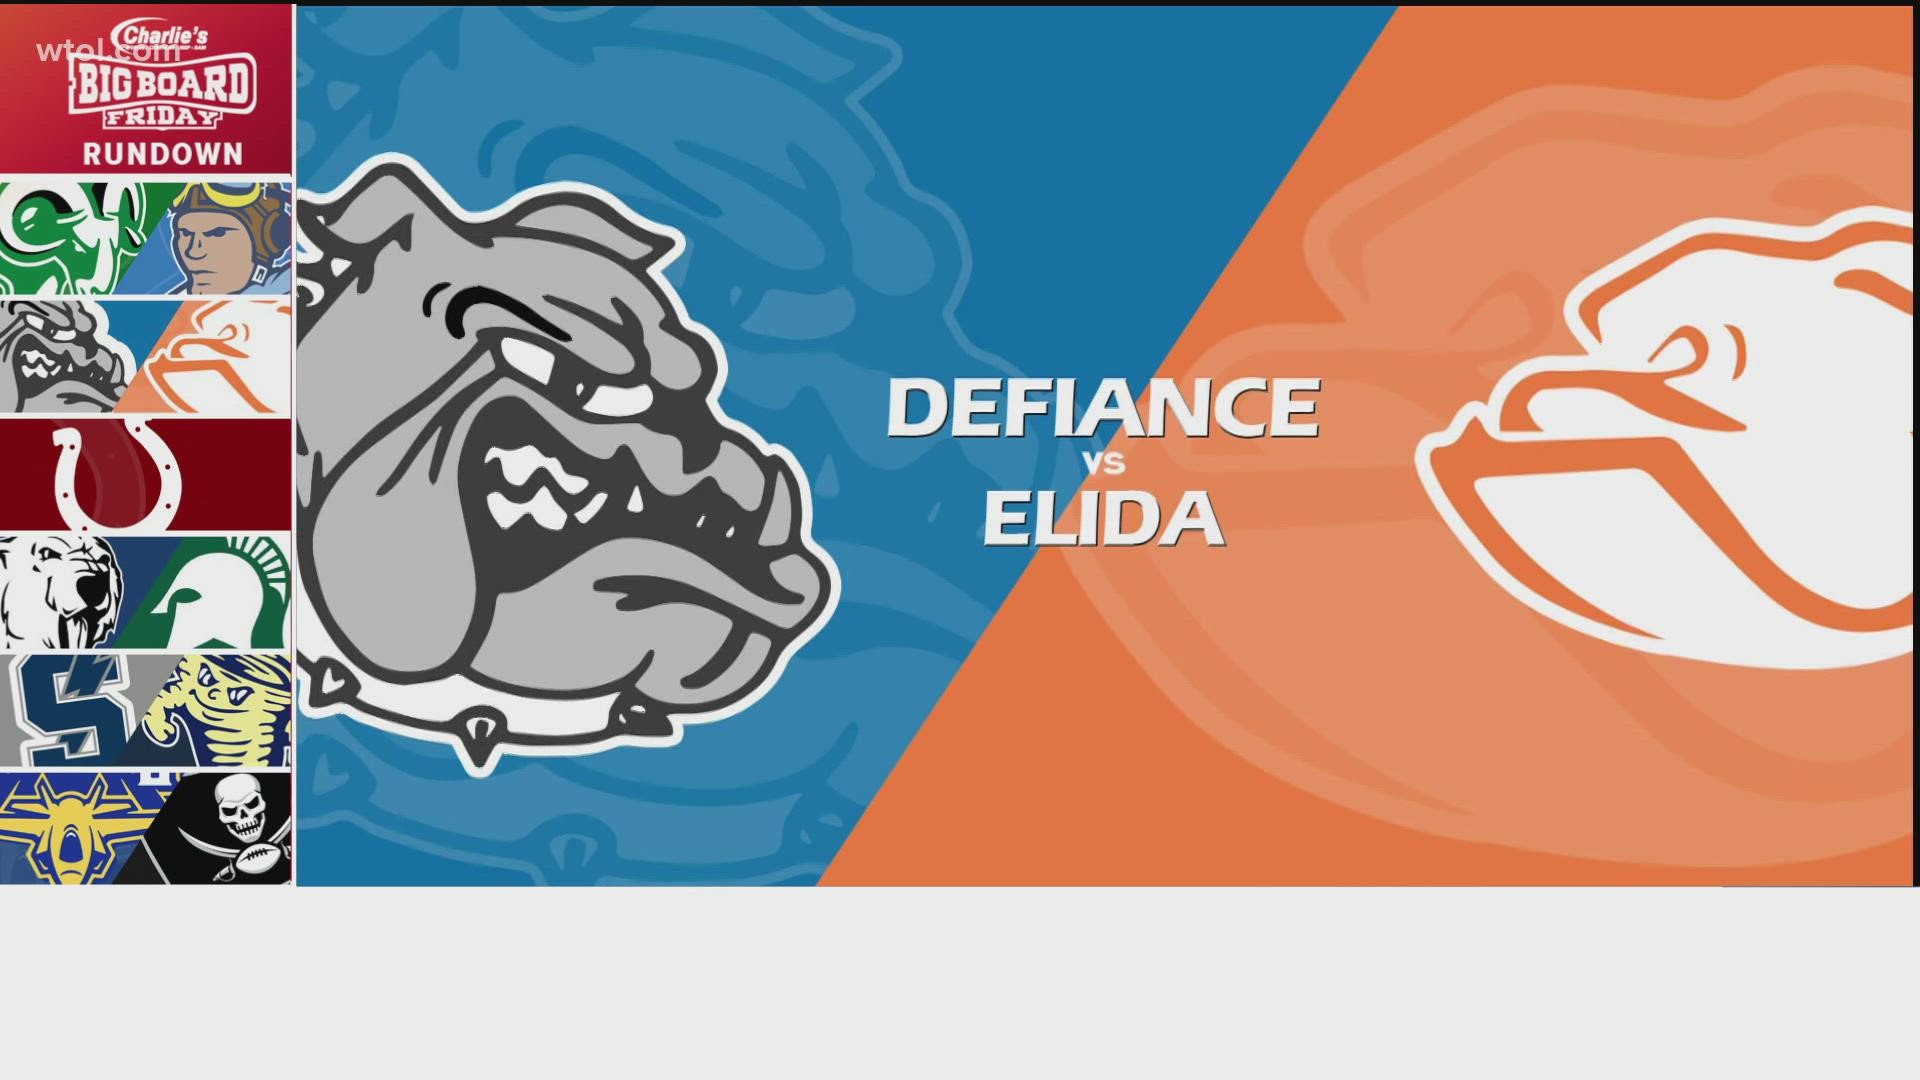 Elida beats Defiance to win the battle of the bulldogs.